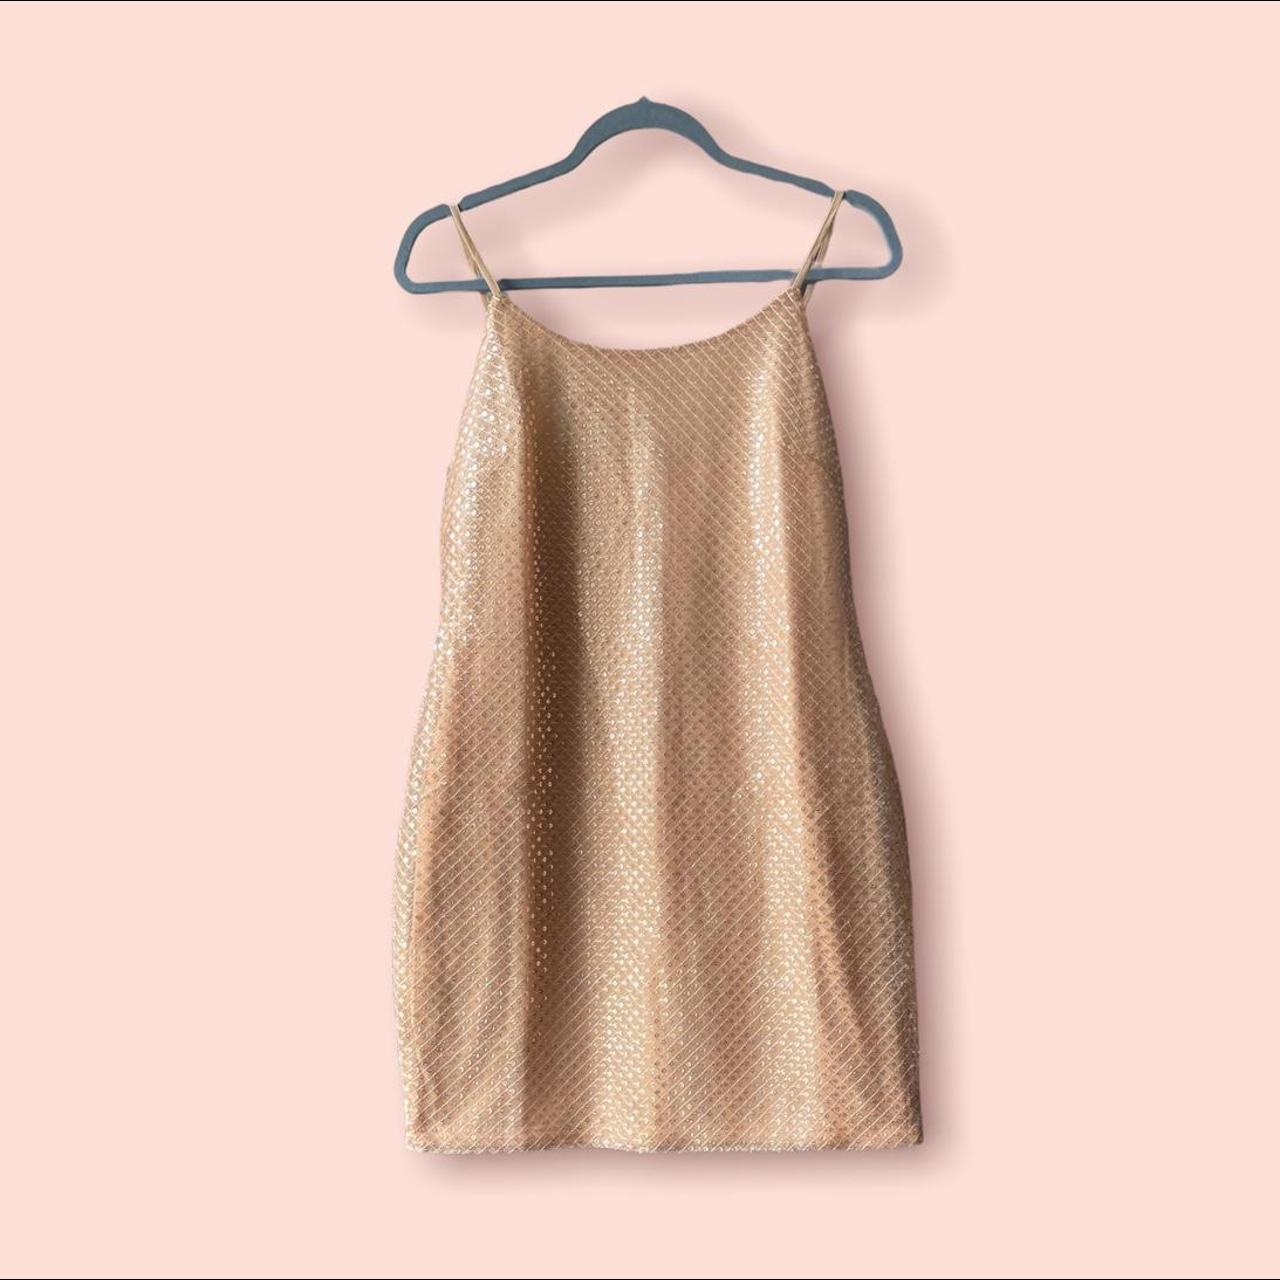 Gold Sequin Cami Mini Dress from I Saw It First... - Depop